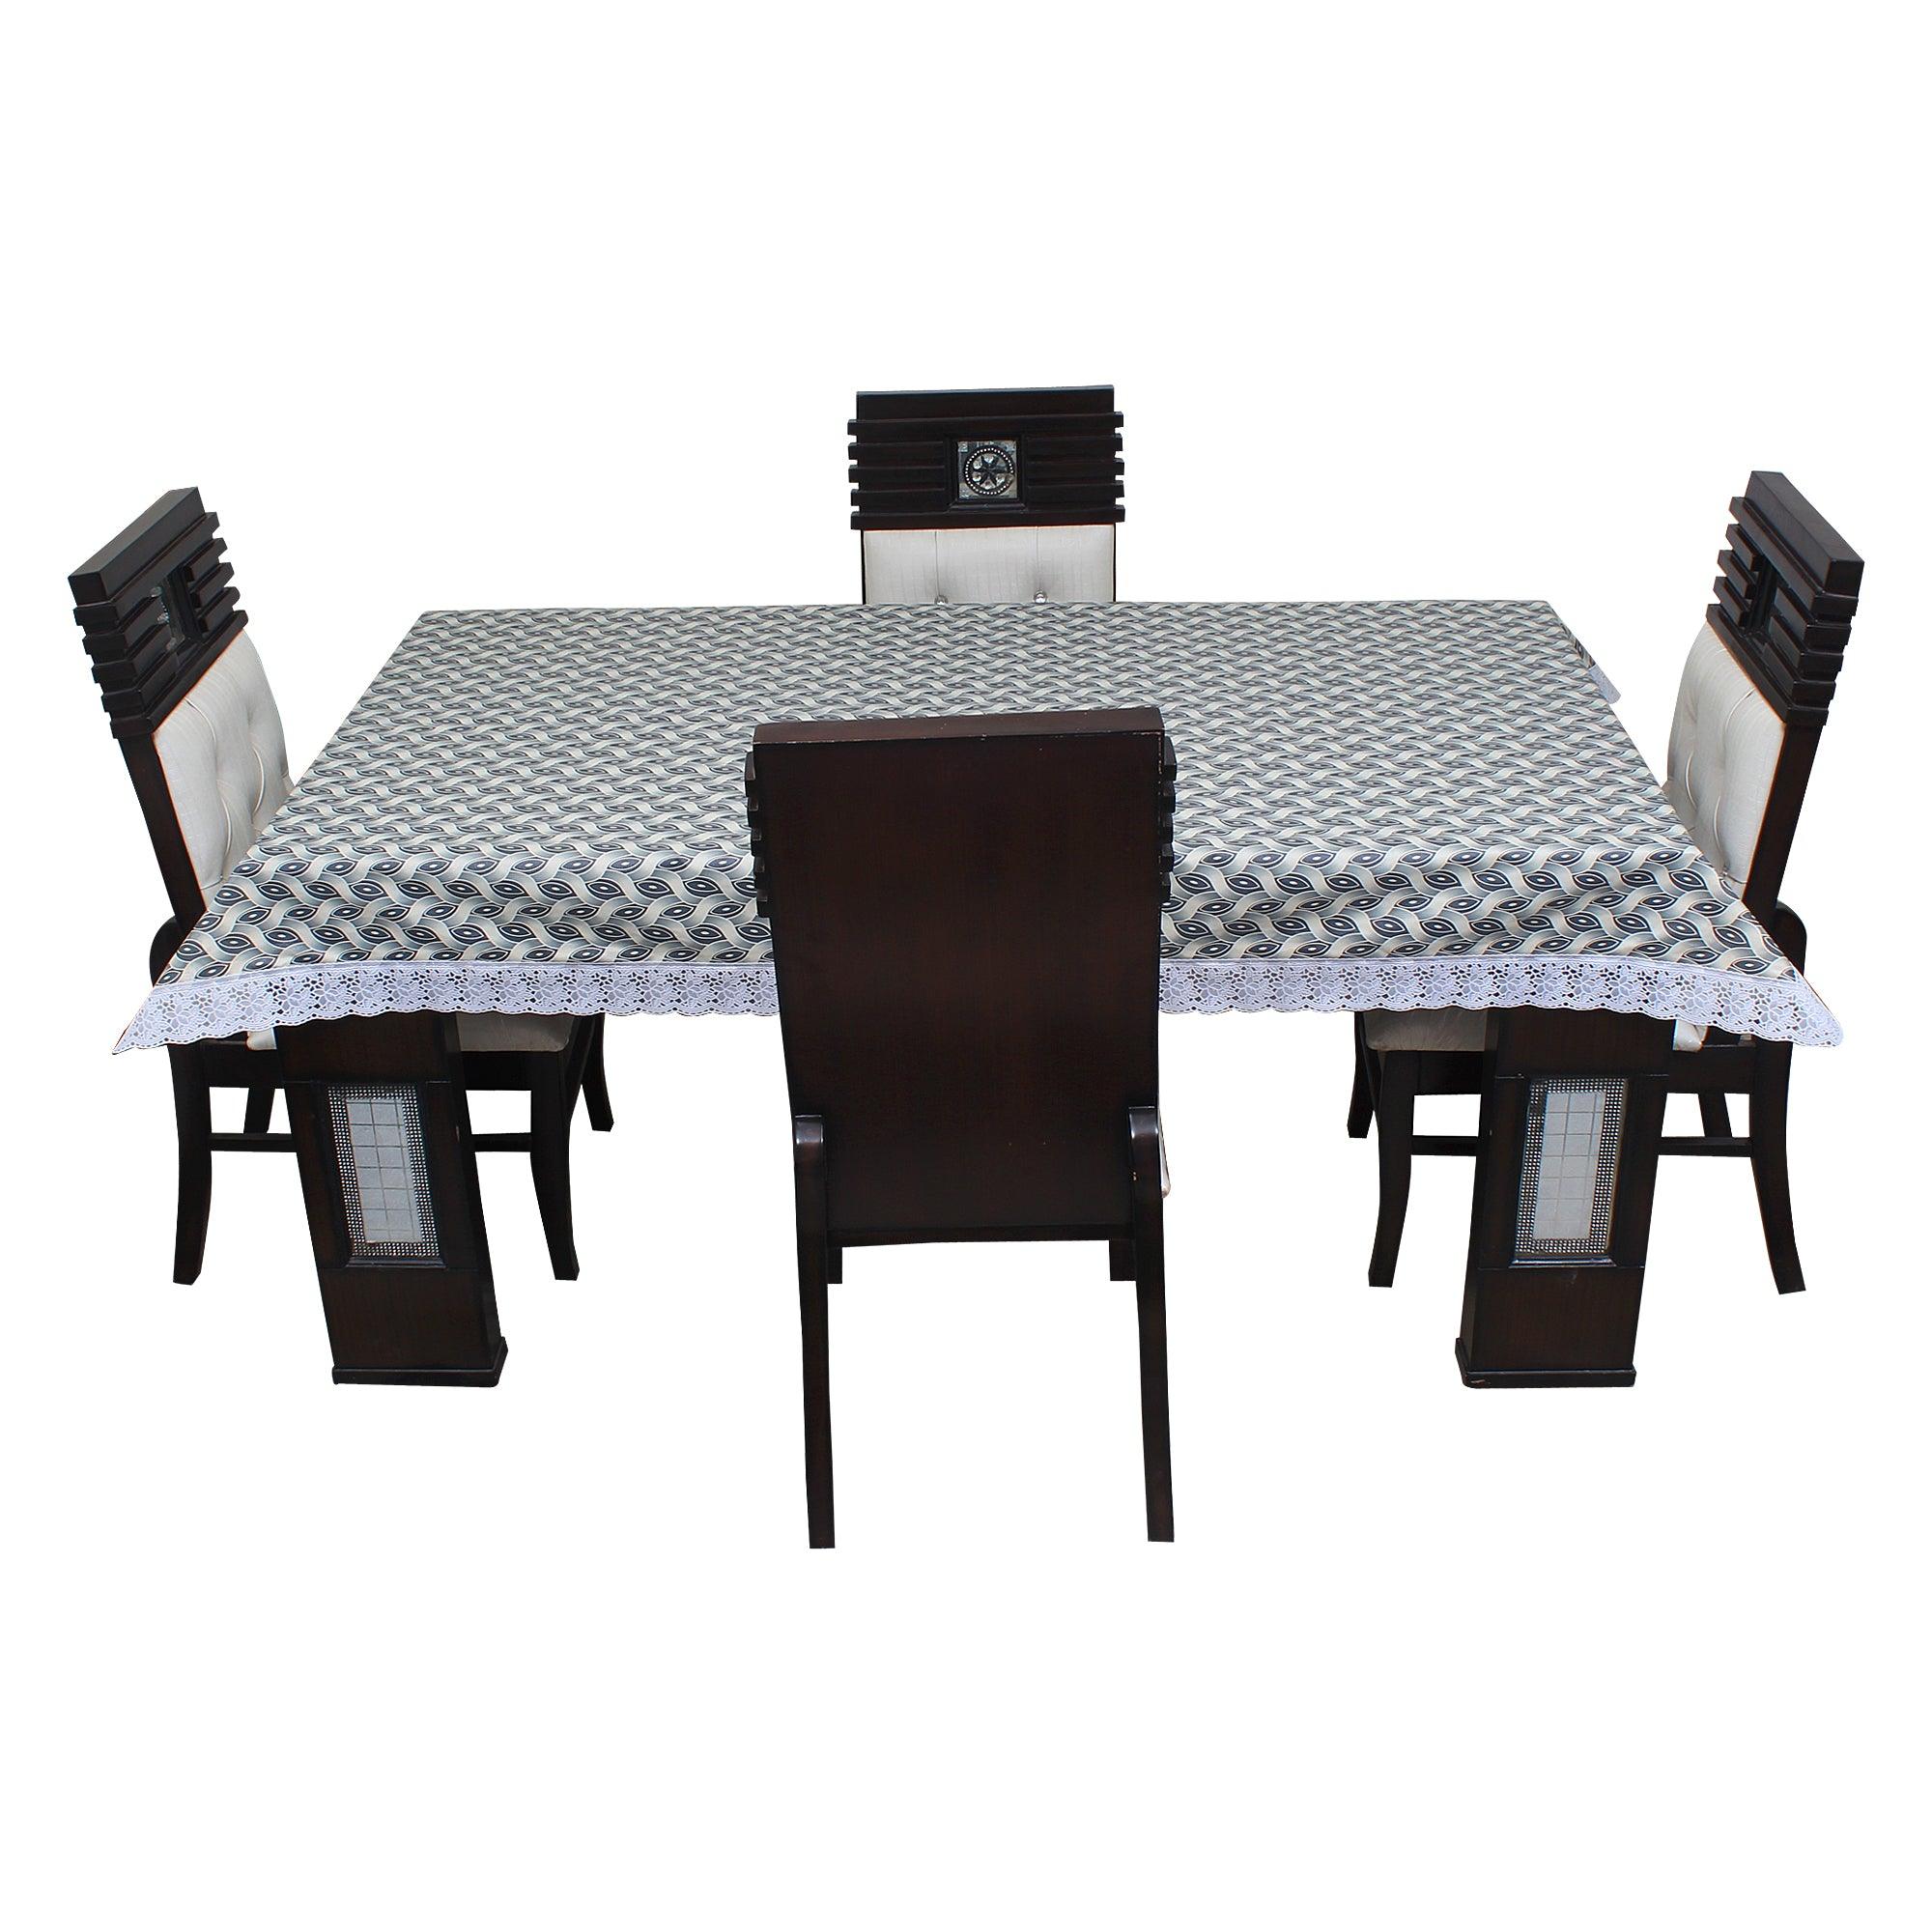 Waterproof and Dustproof Dining Table Cover, SA69 - Dream Care Furnishings Private Limited